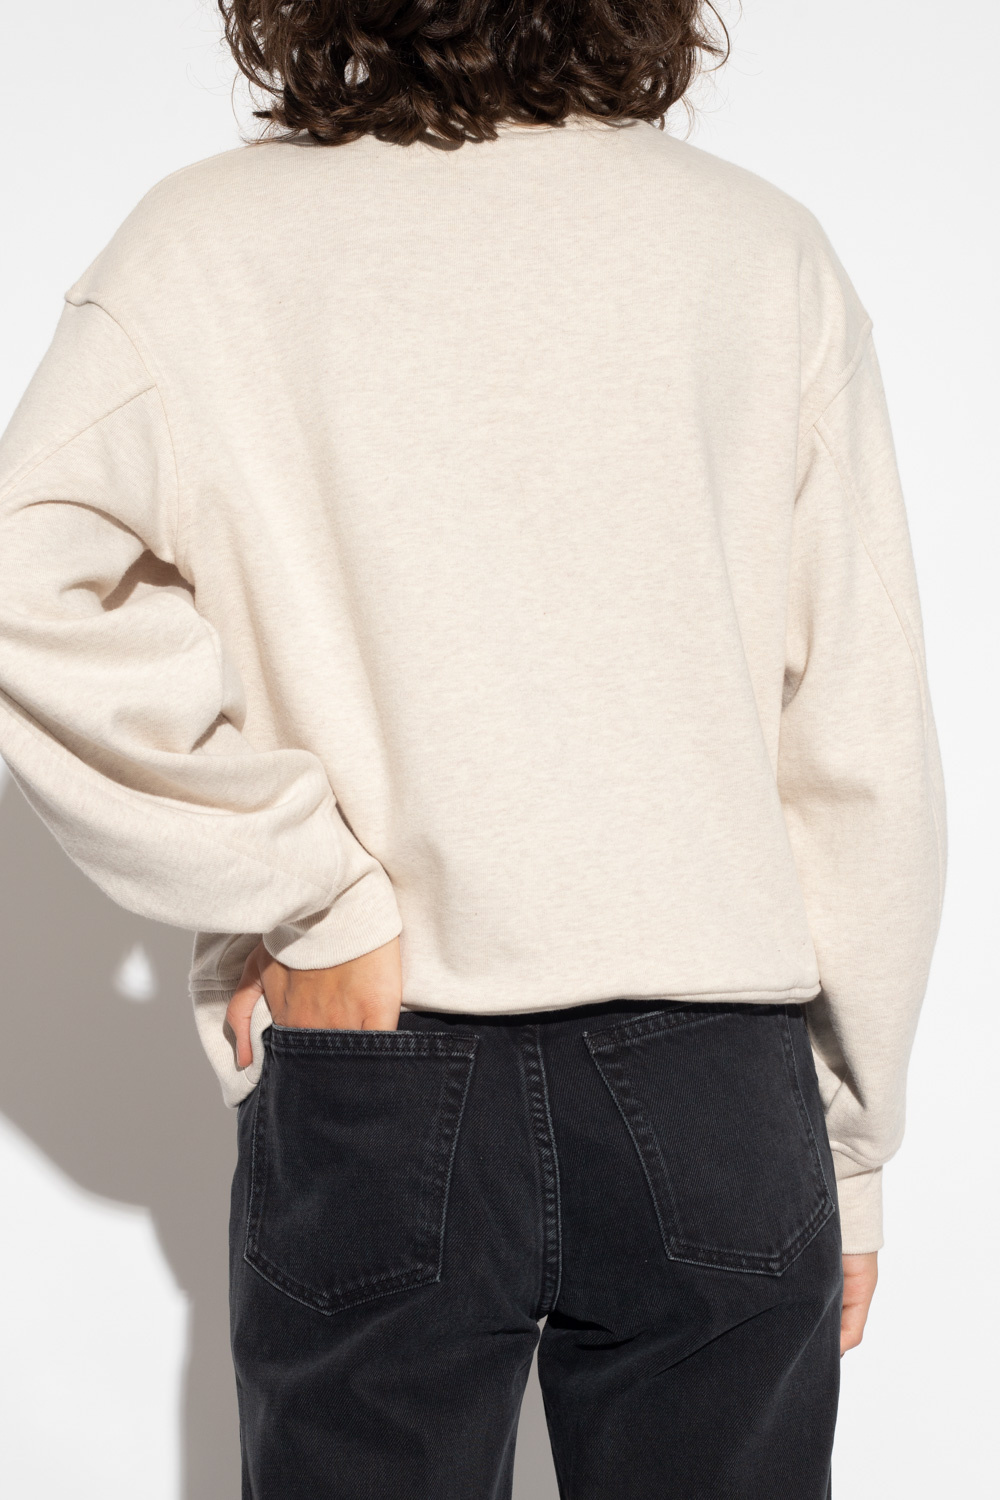 Levi's three-quarter sweatshirt ‘Made & Crafted®’ collection